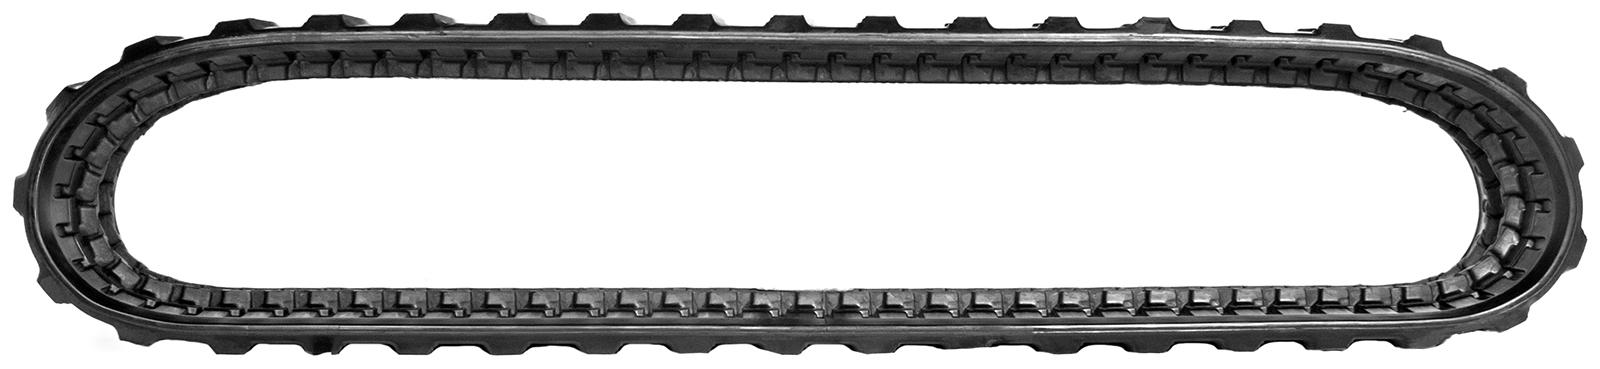 set of 2 16" camso heavy duty rubber track (400x72.5nx74)